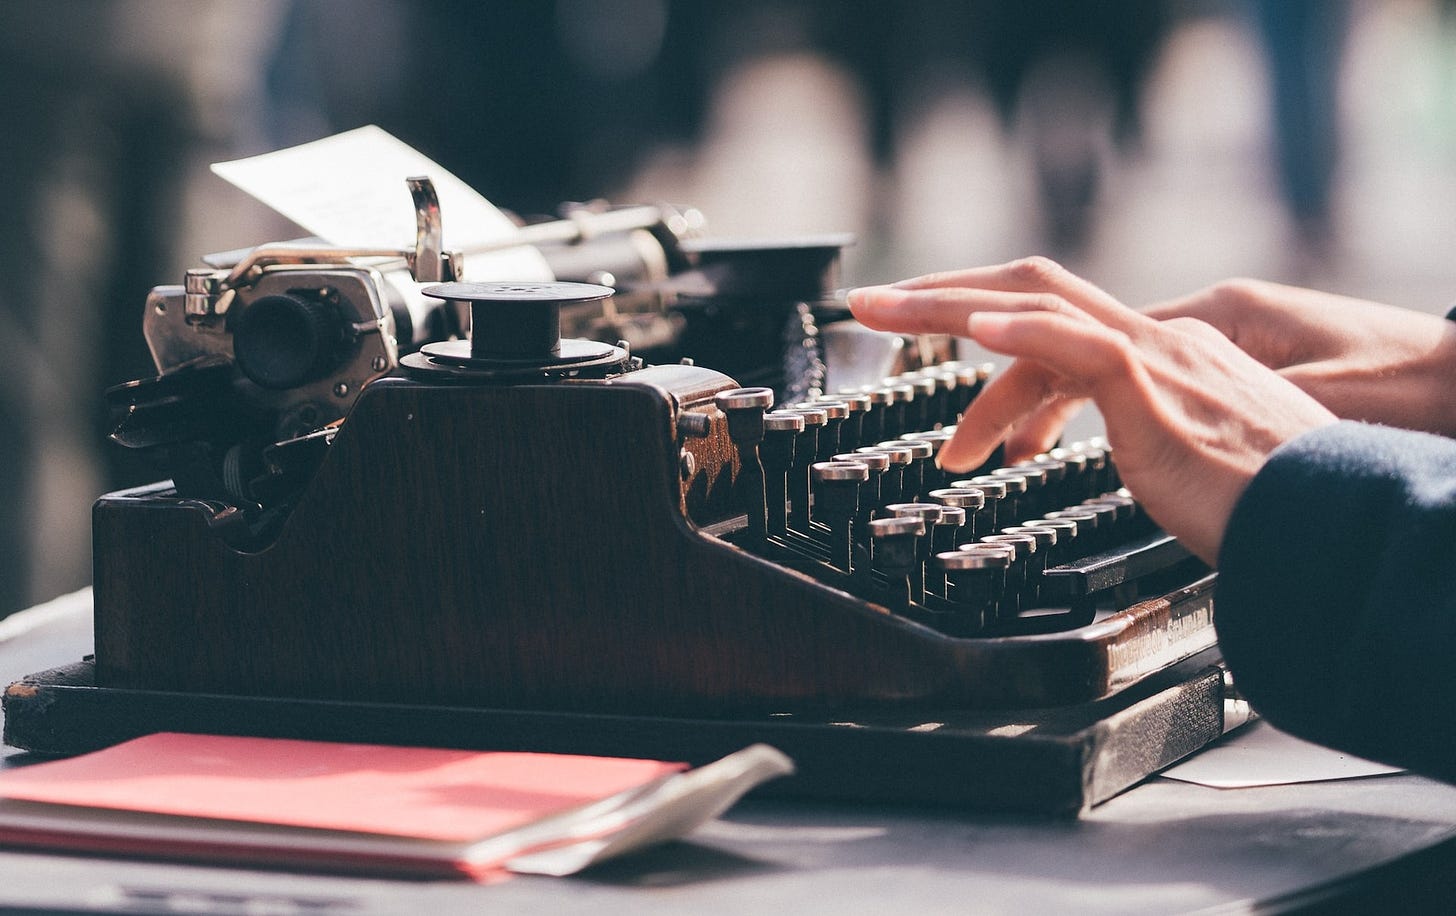 Photograph of hands typing on a vintage typewriter, anotebook alongside on the table